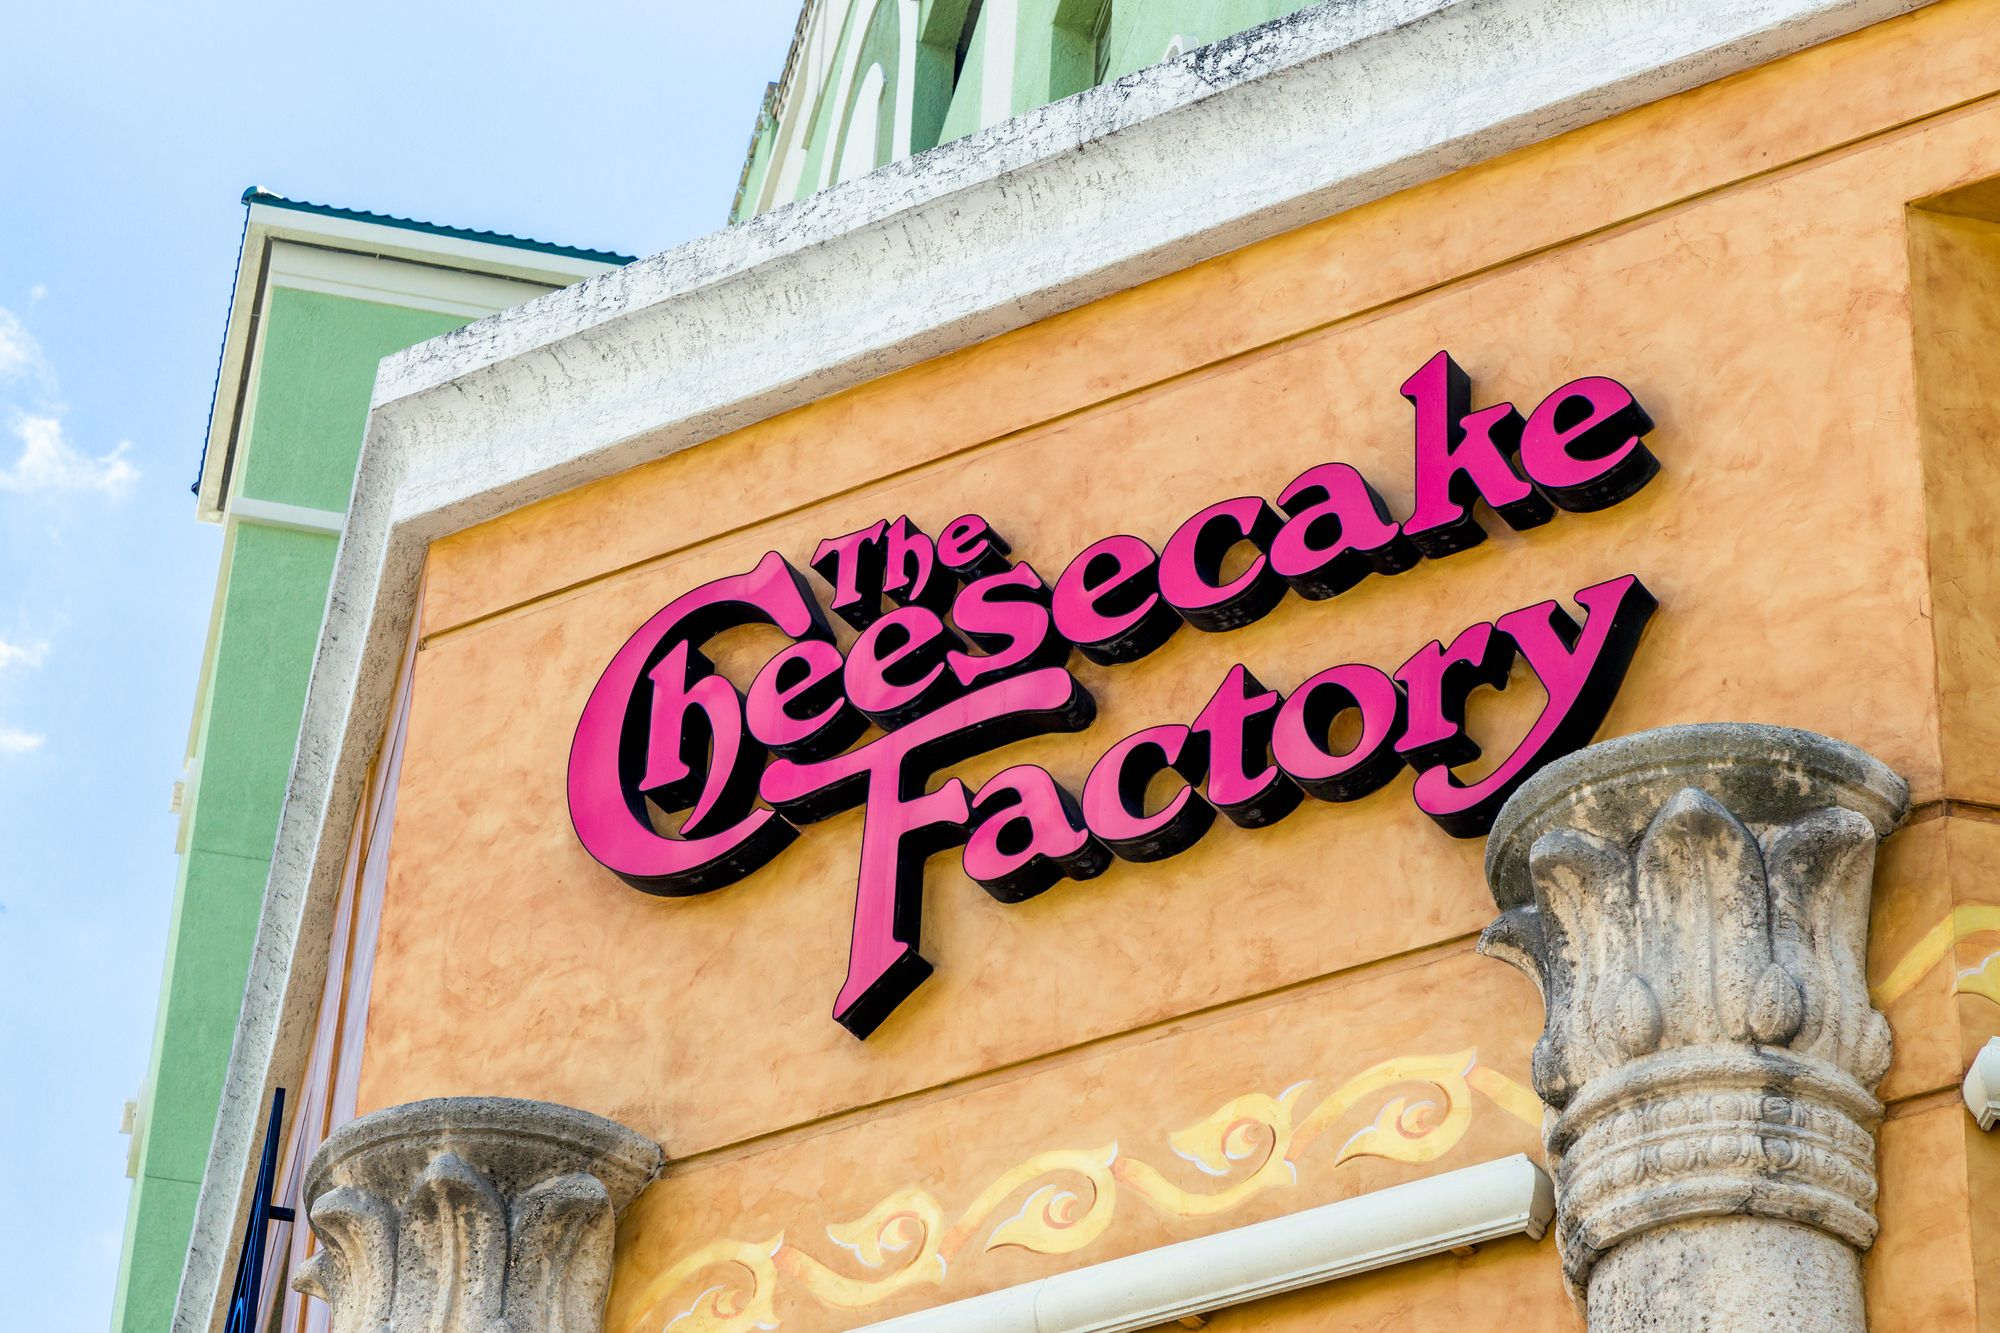 FORT LAUDERDALE, FLA/USA - APRIL 10, 2017: The Cheesecake Factory exterior sign and logo. The Cheesecake Factory, Inc. is a restaurant company and distributor of cheesecakes based in the United States.